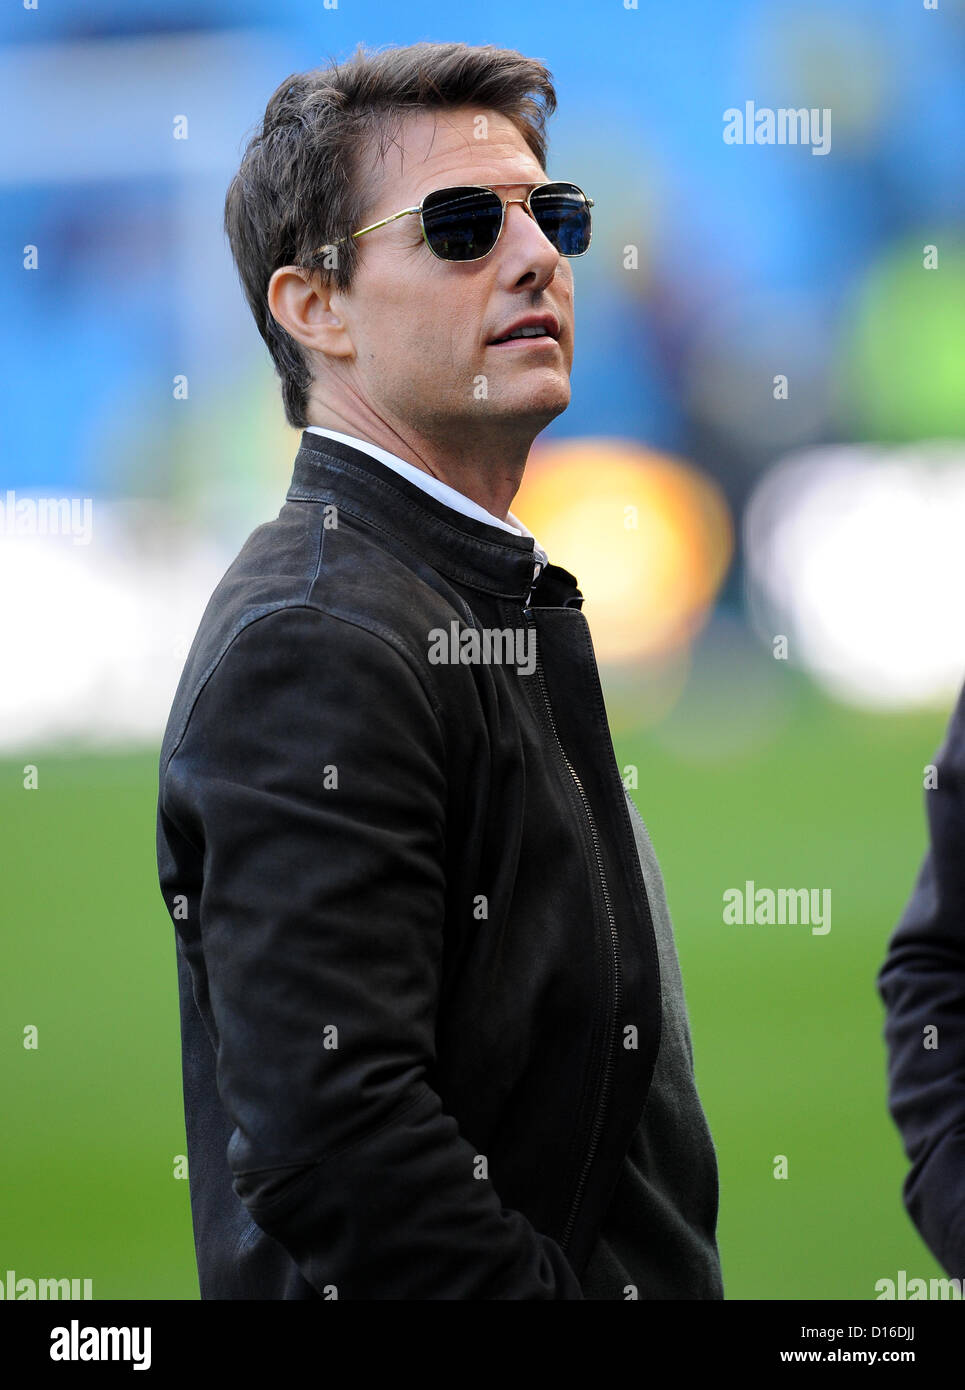 TOM CRUISE ATTENDS GAME TOM CRUISE ATTENDS MANCHESTER DERBY CITY OF MANCHESTER STADIUM MANCHESTER ENGLAND 09 December 2012 Stock Photo